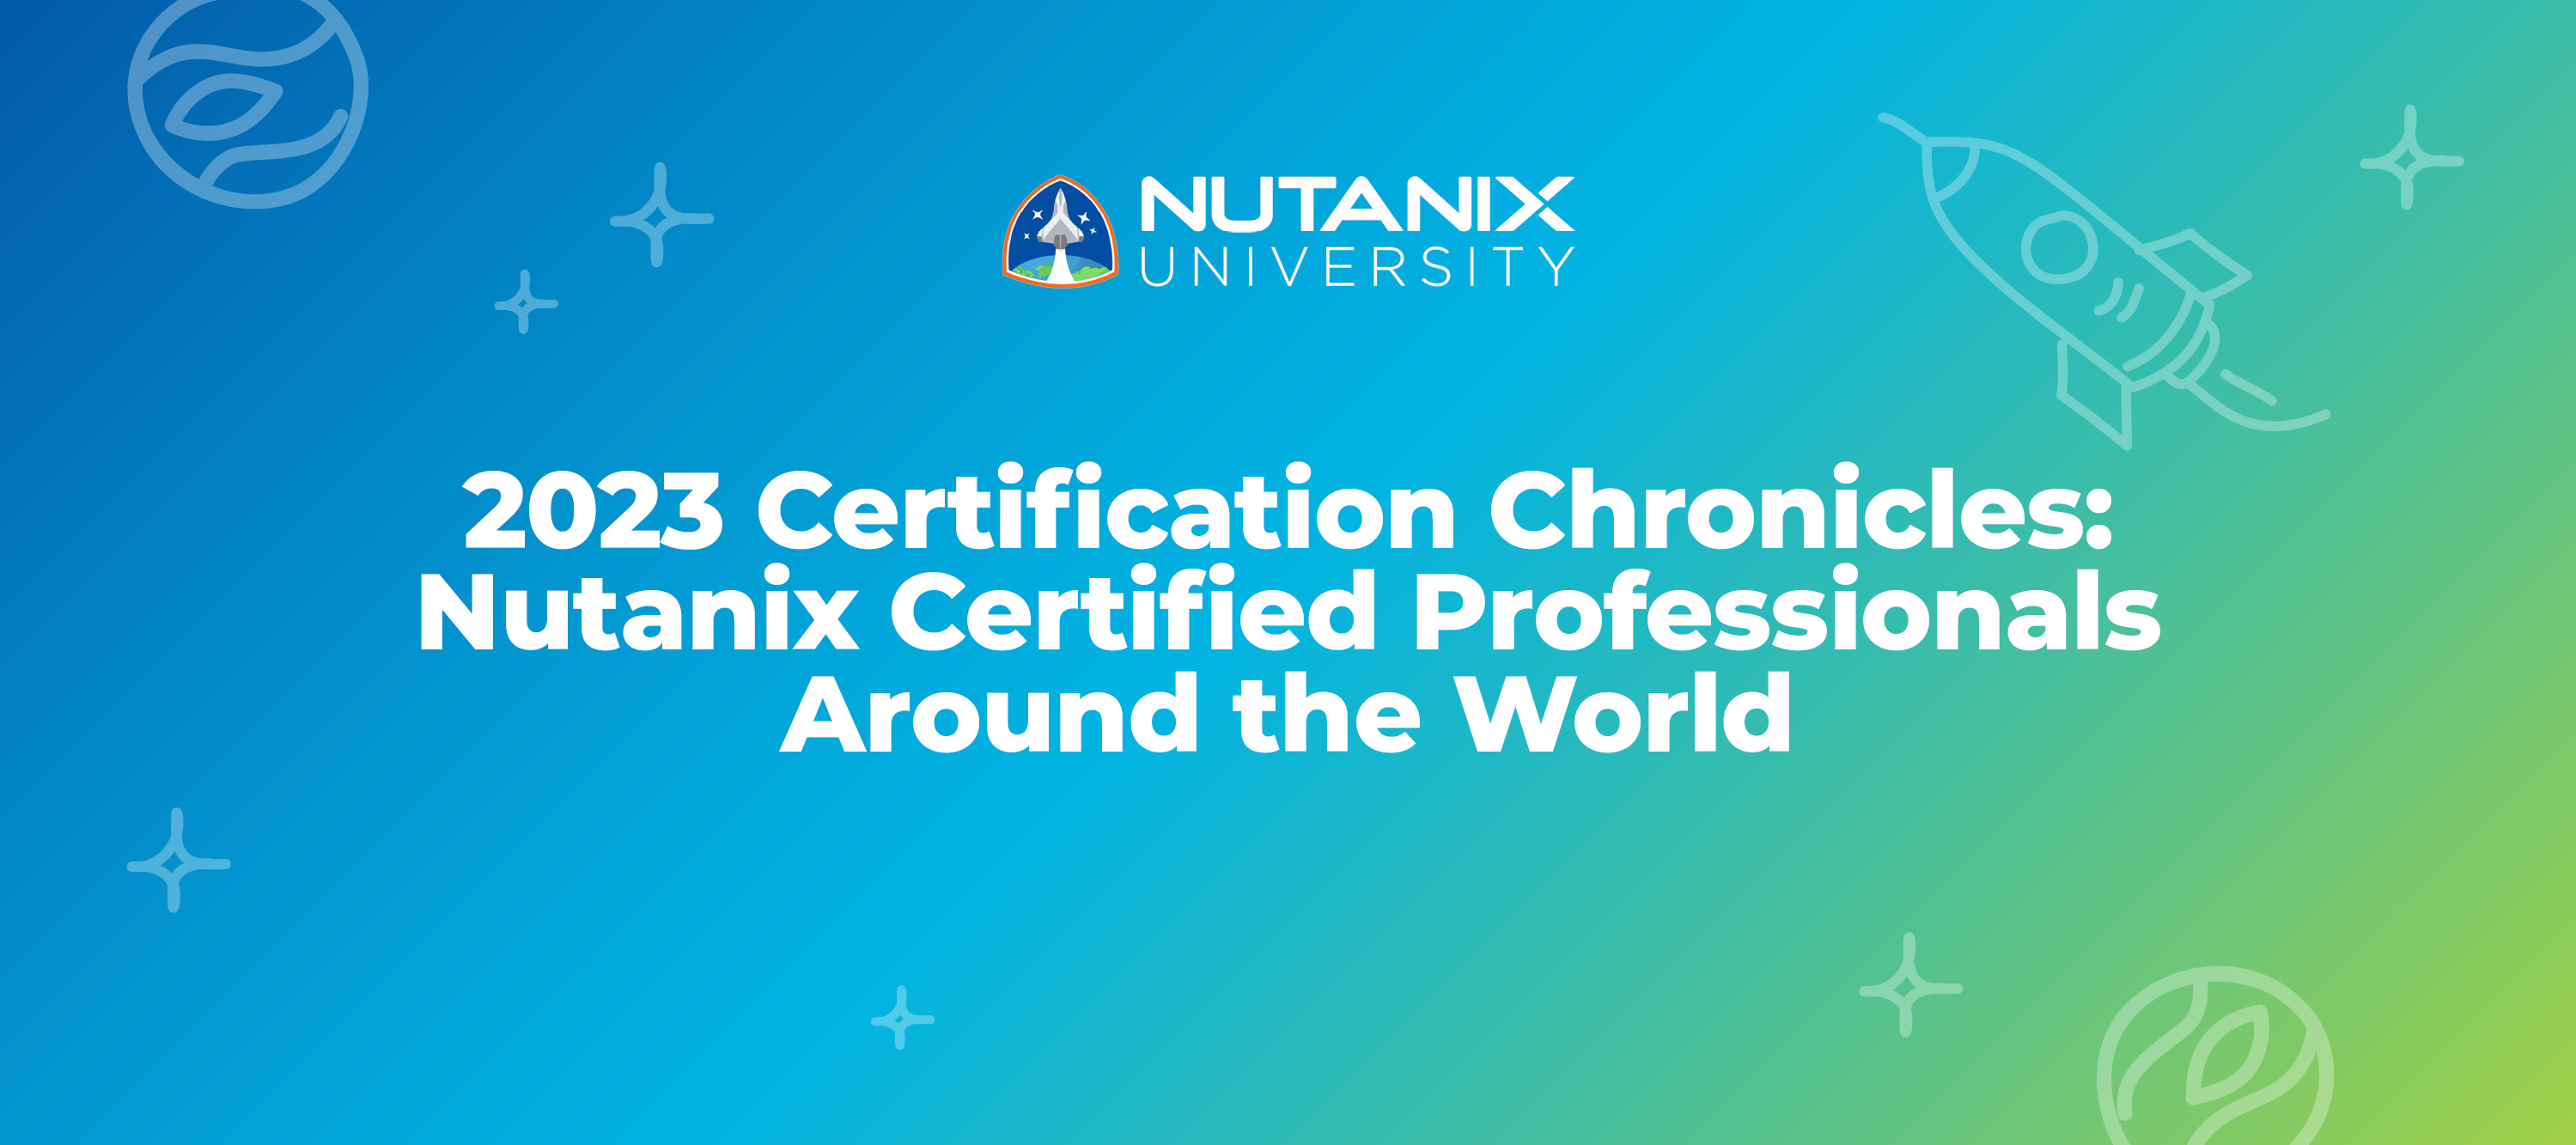 2023 Certification Chronicles: Nutanix Certified Professionals Around the World